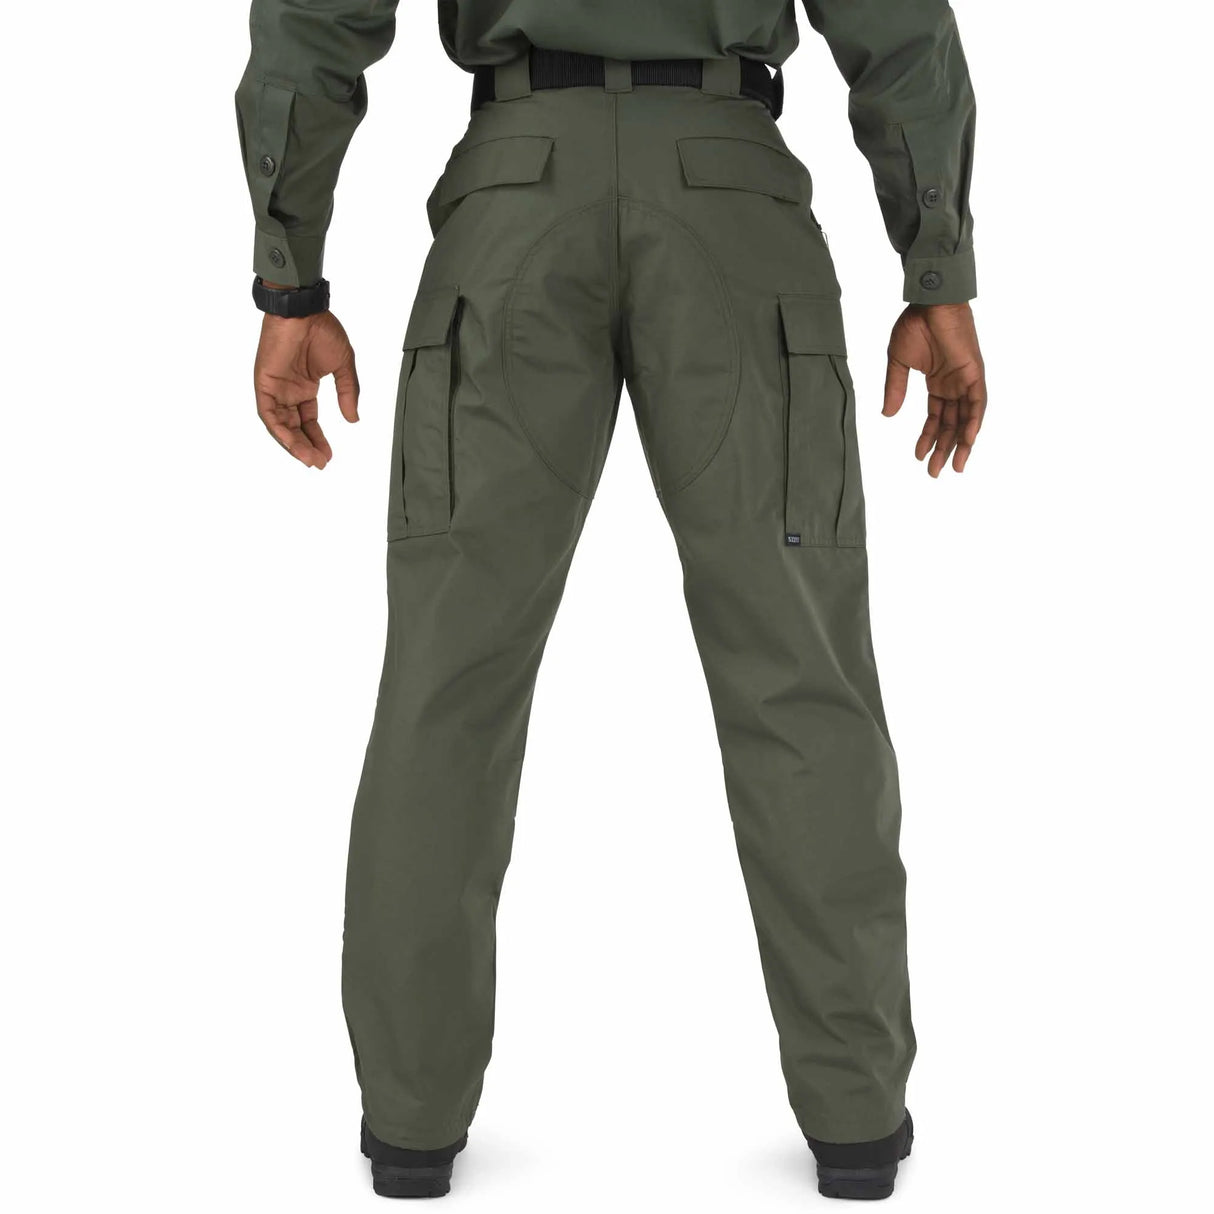 Versatile and Practical Tactical Pant: Ideal for a wide range of missions and activities.